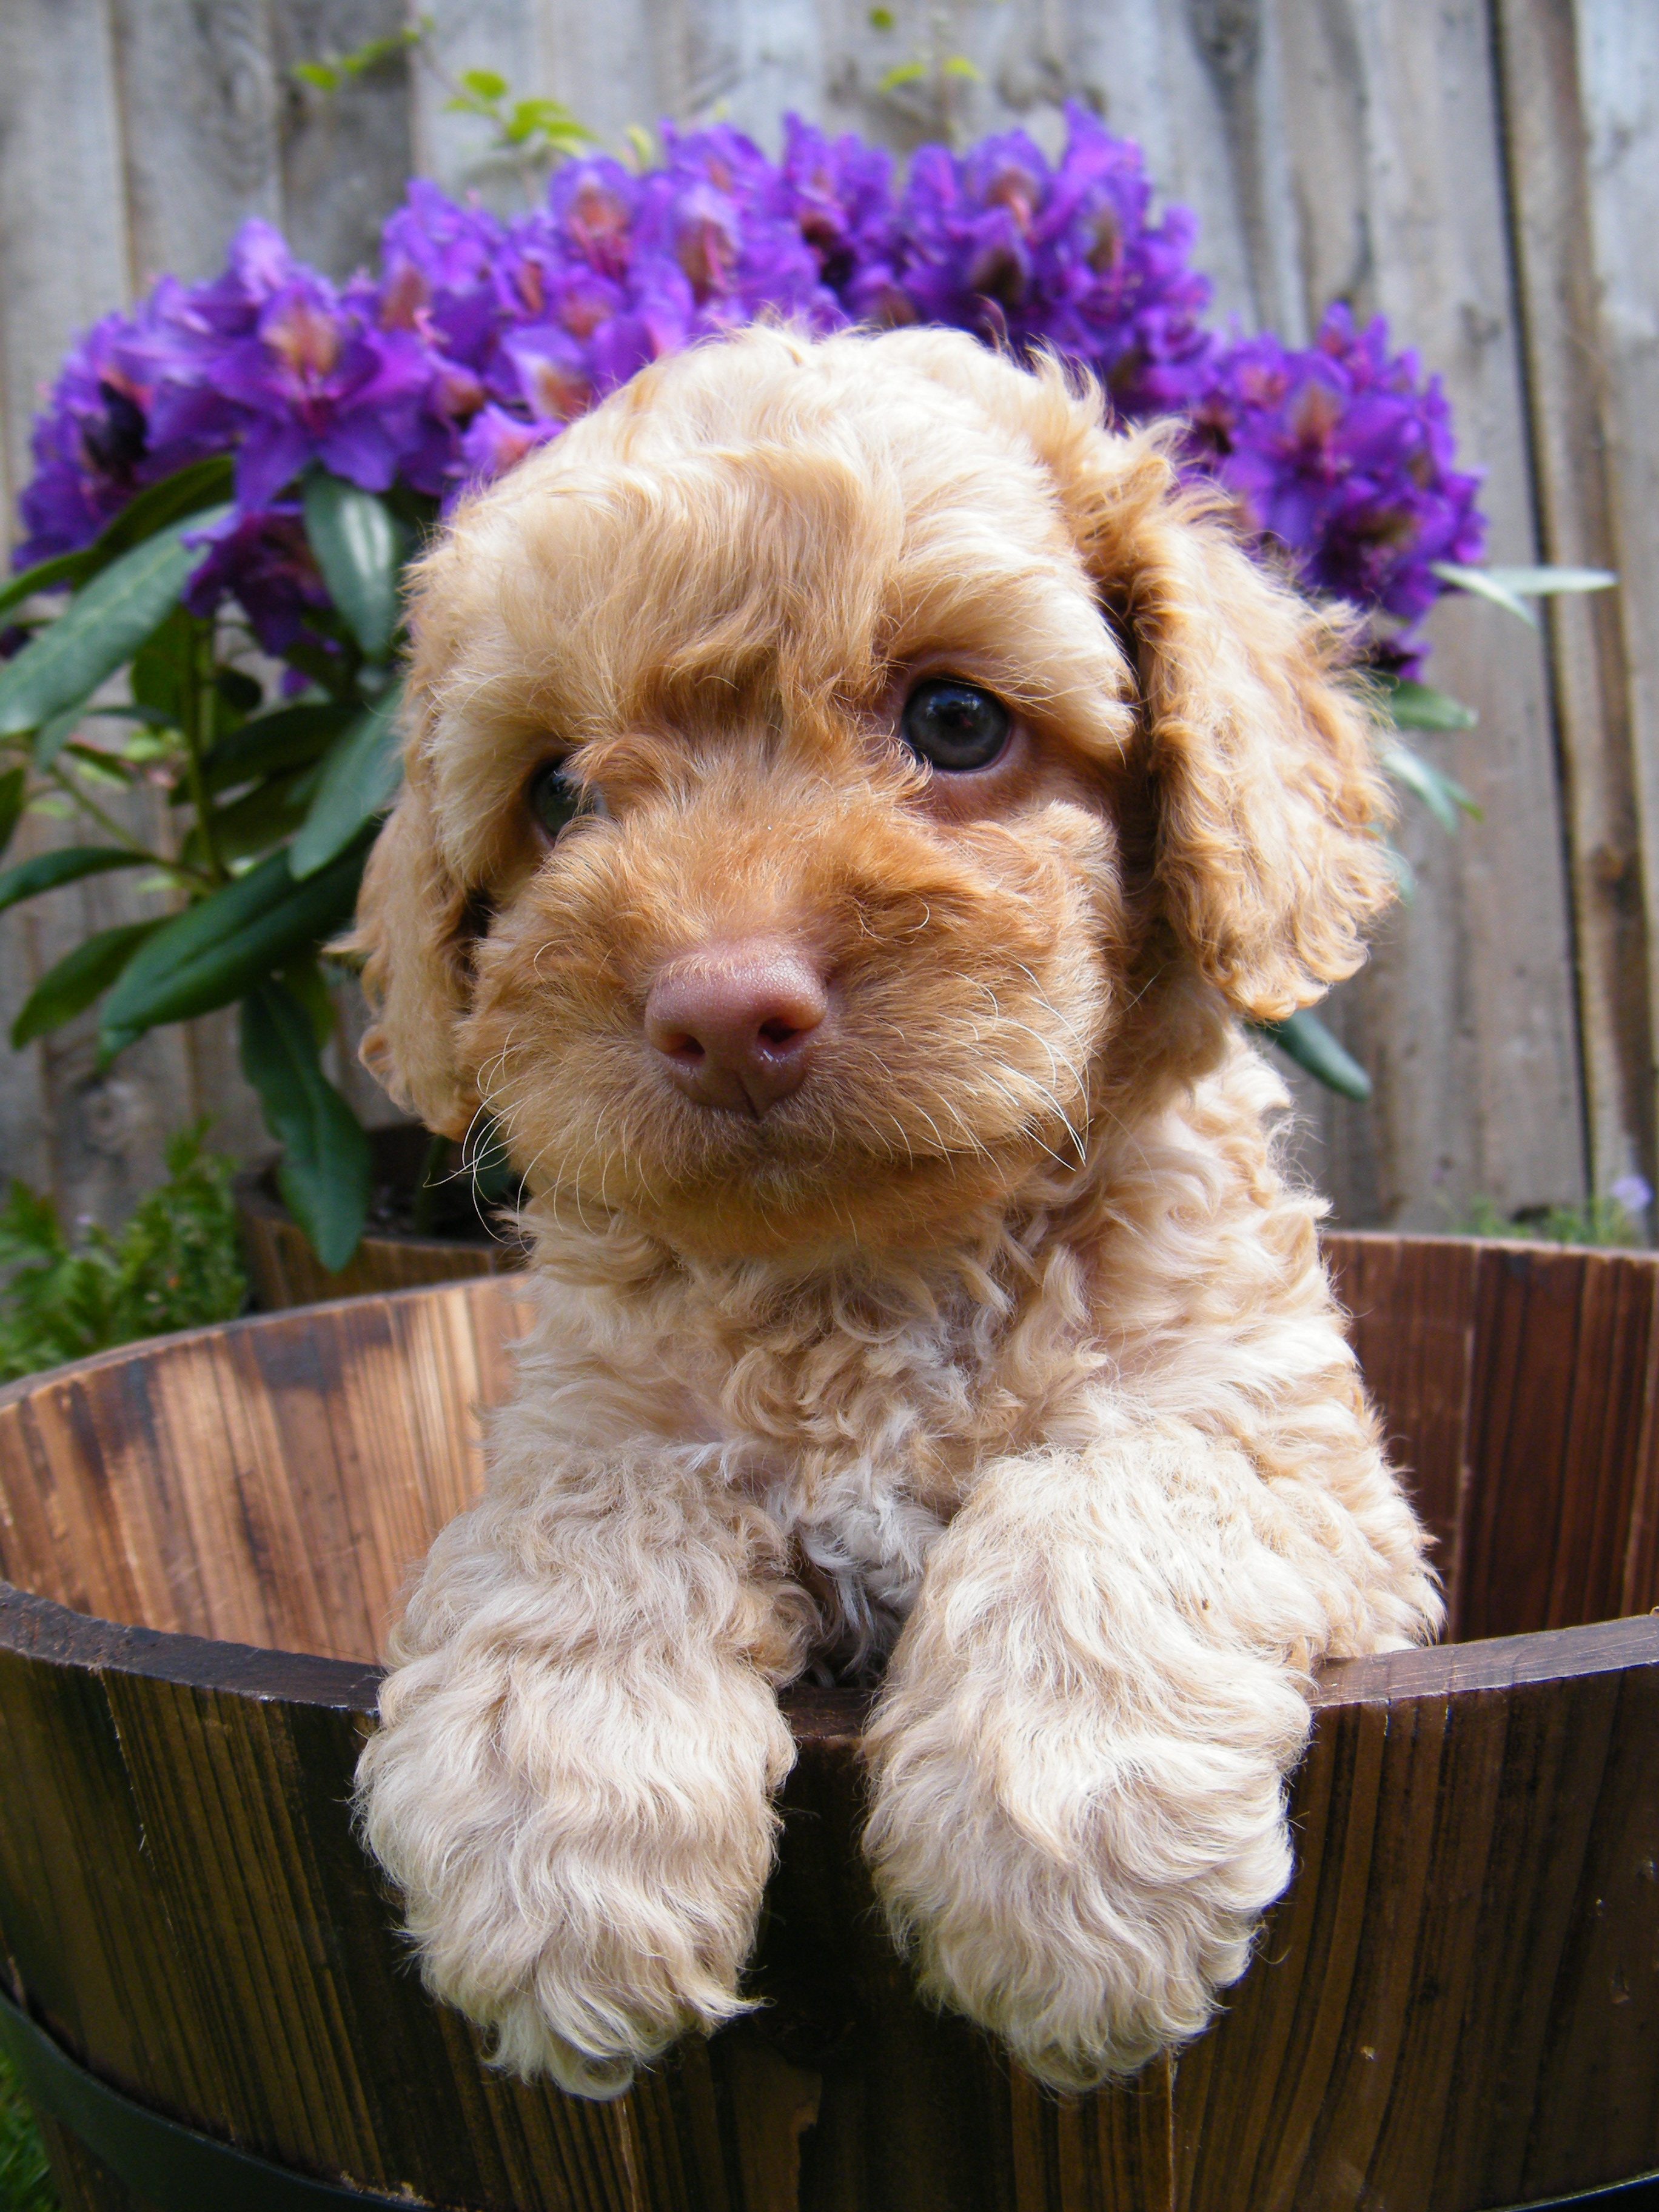 What Are Some Fun Facts About Mini Labradoodles?